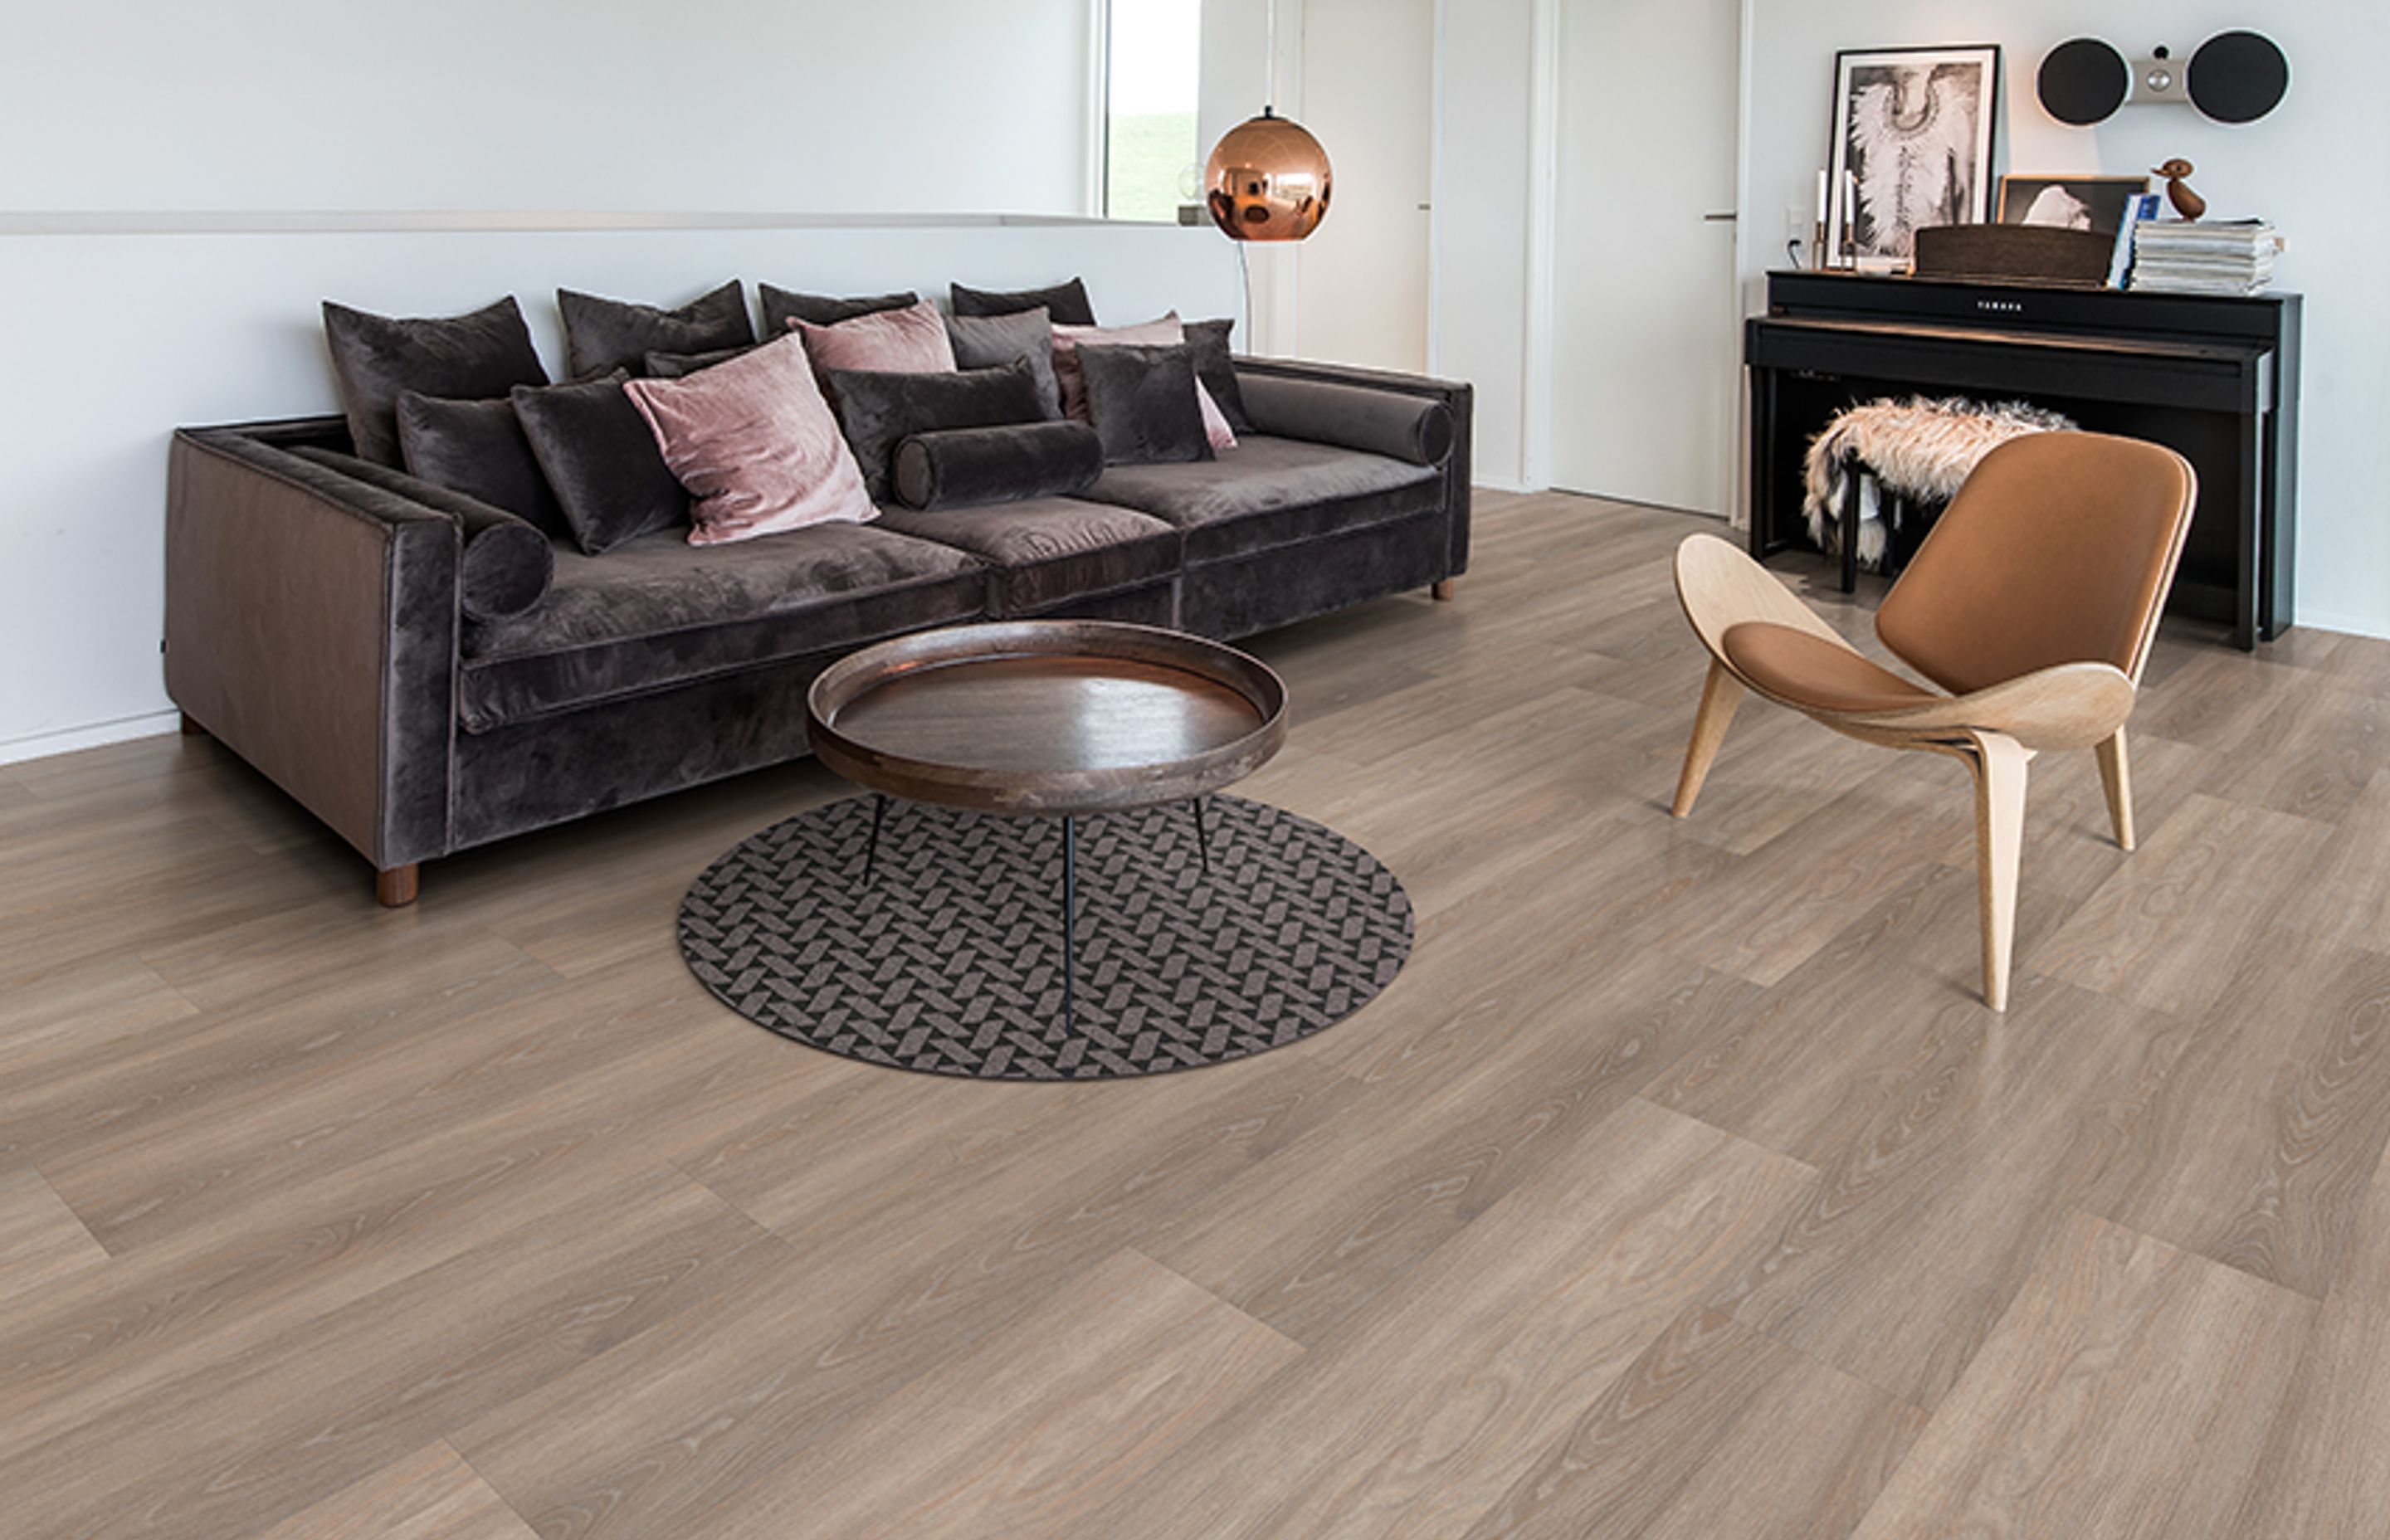 The timber-look Kährs Luxury Tiles come in a 1829mm x 220mm plank format.